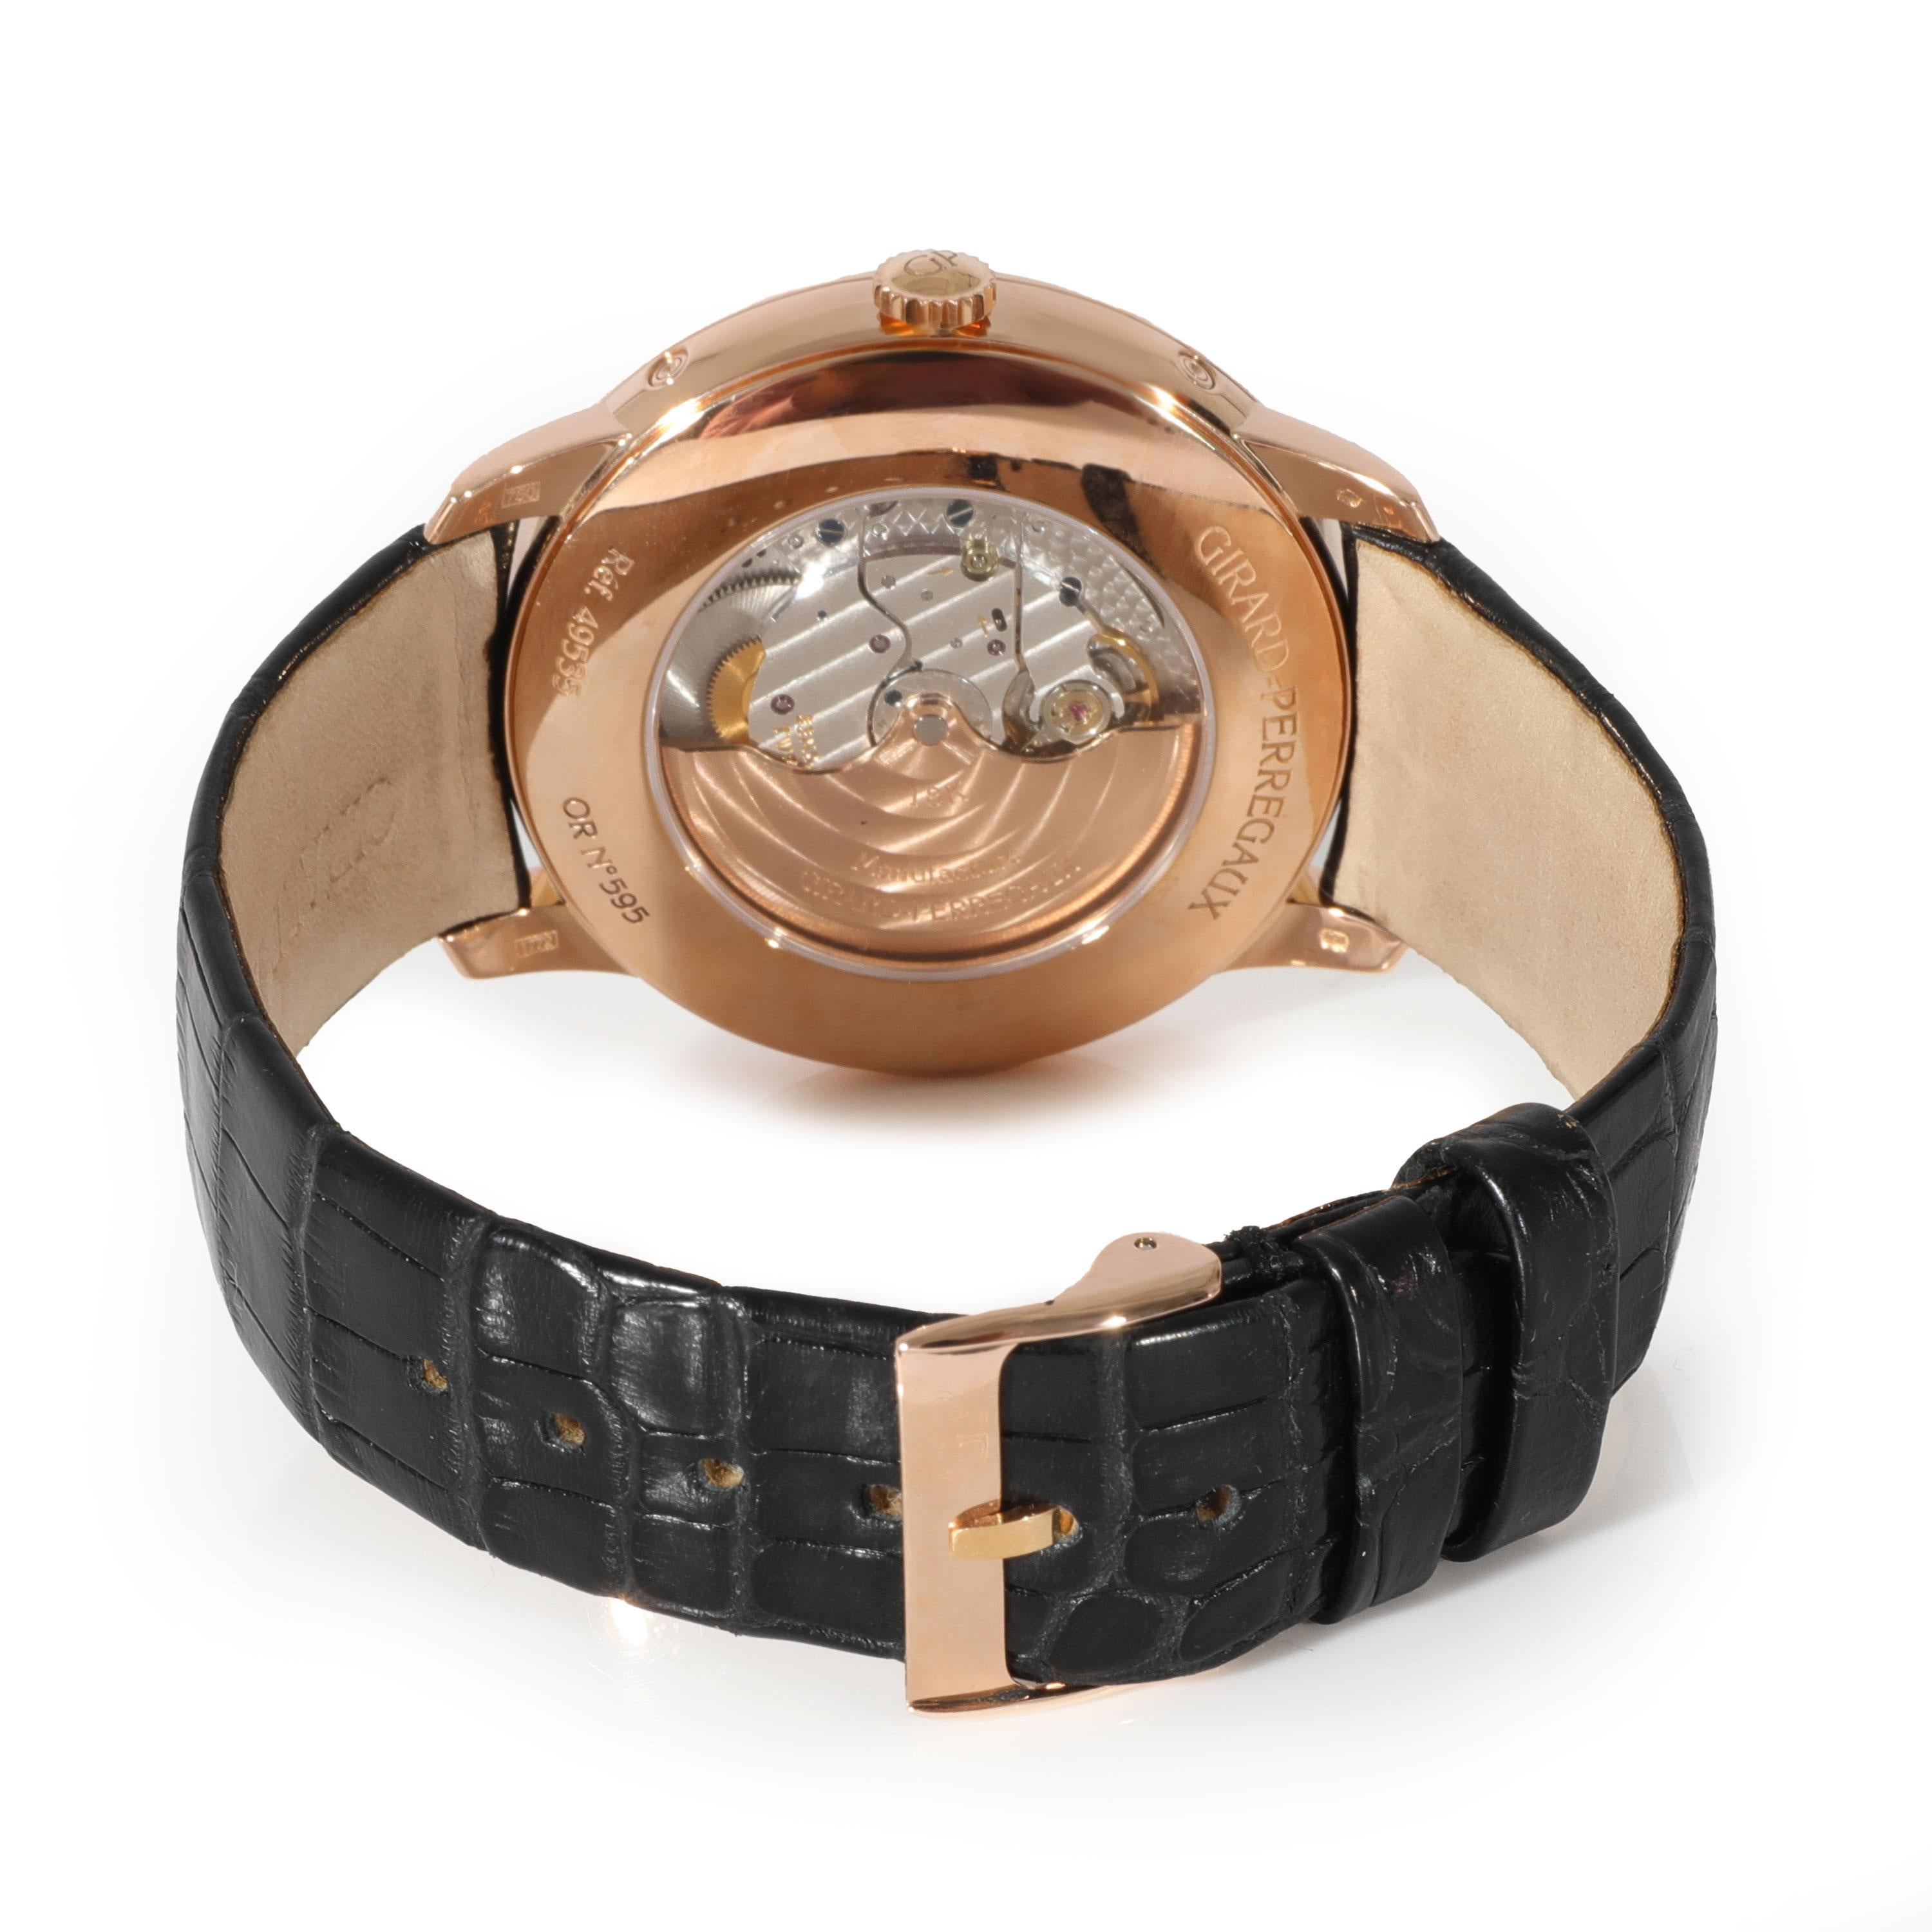 Girard Perregaux 1966 49535-52-151-BK6A Men's Watch in 18kt Rose Gold

SKU: 127419

PRIMARY DETAILS
Brand: Girard Perregaux
Model: 1966
Country of Origin: Switzerland
Movement Type: Mechanical: Automatic/Kinetic
Year of Manufacture: